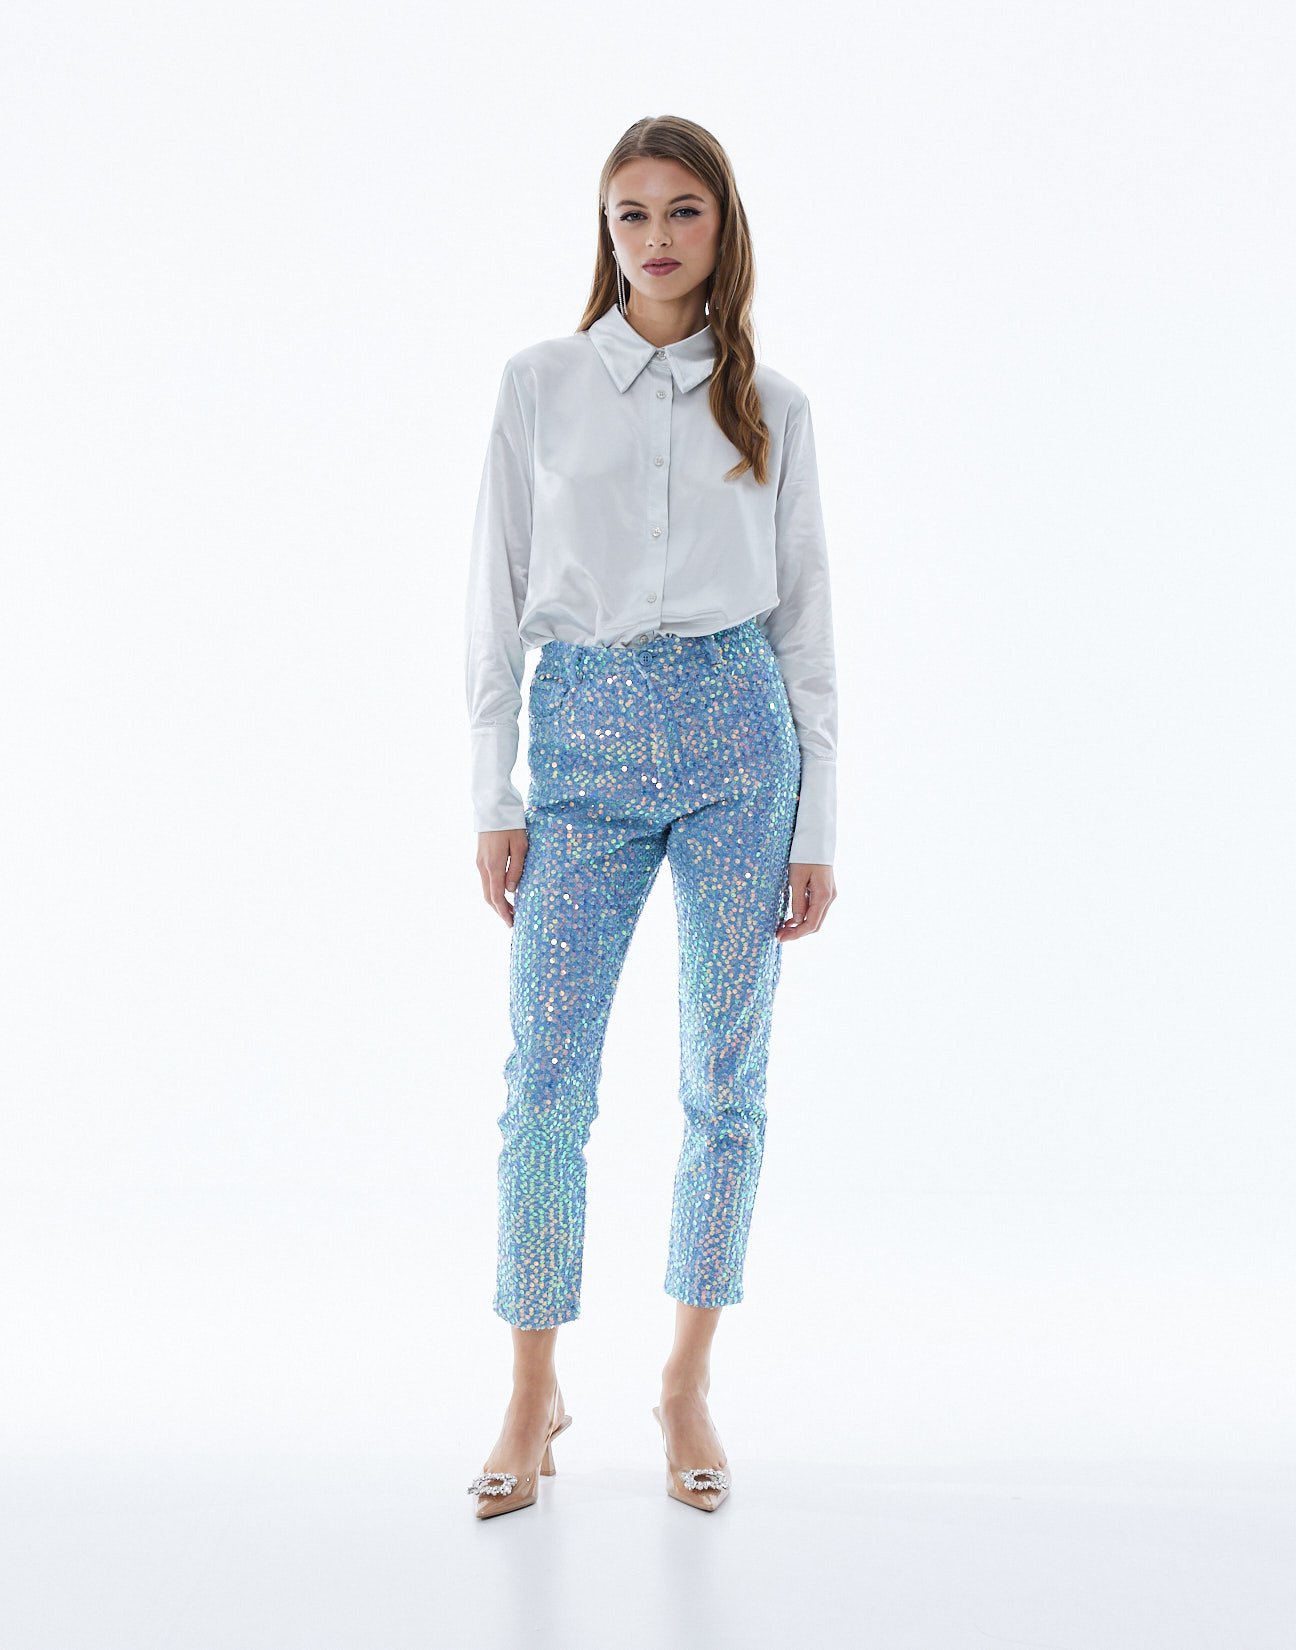 Sequinned jeans trousers